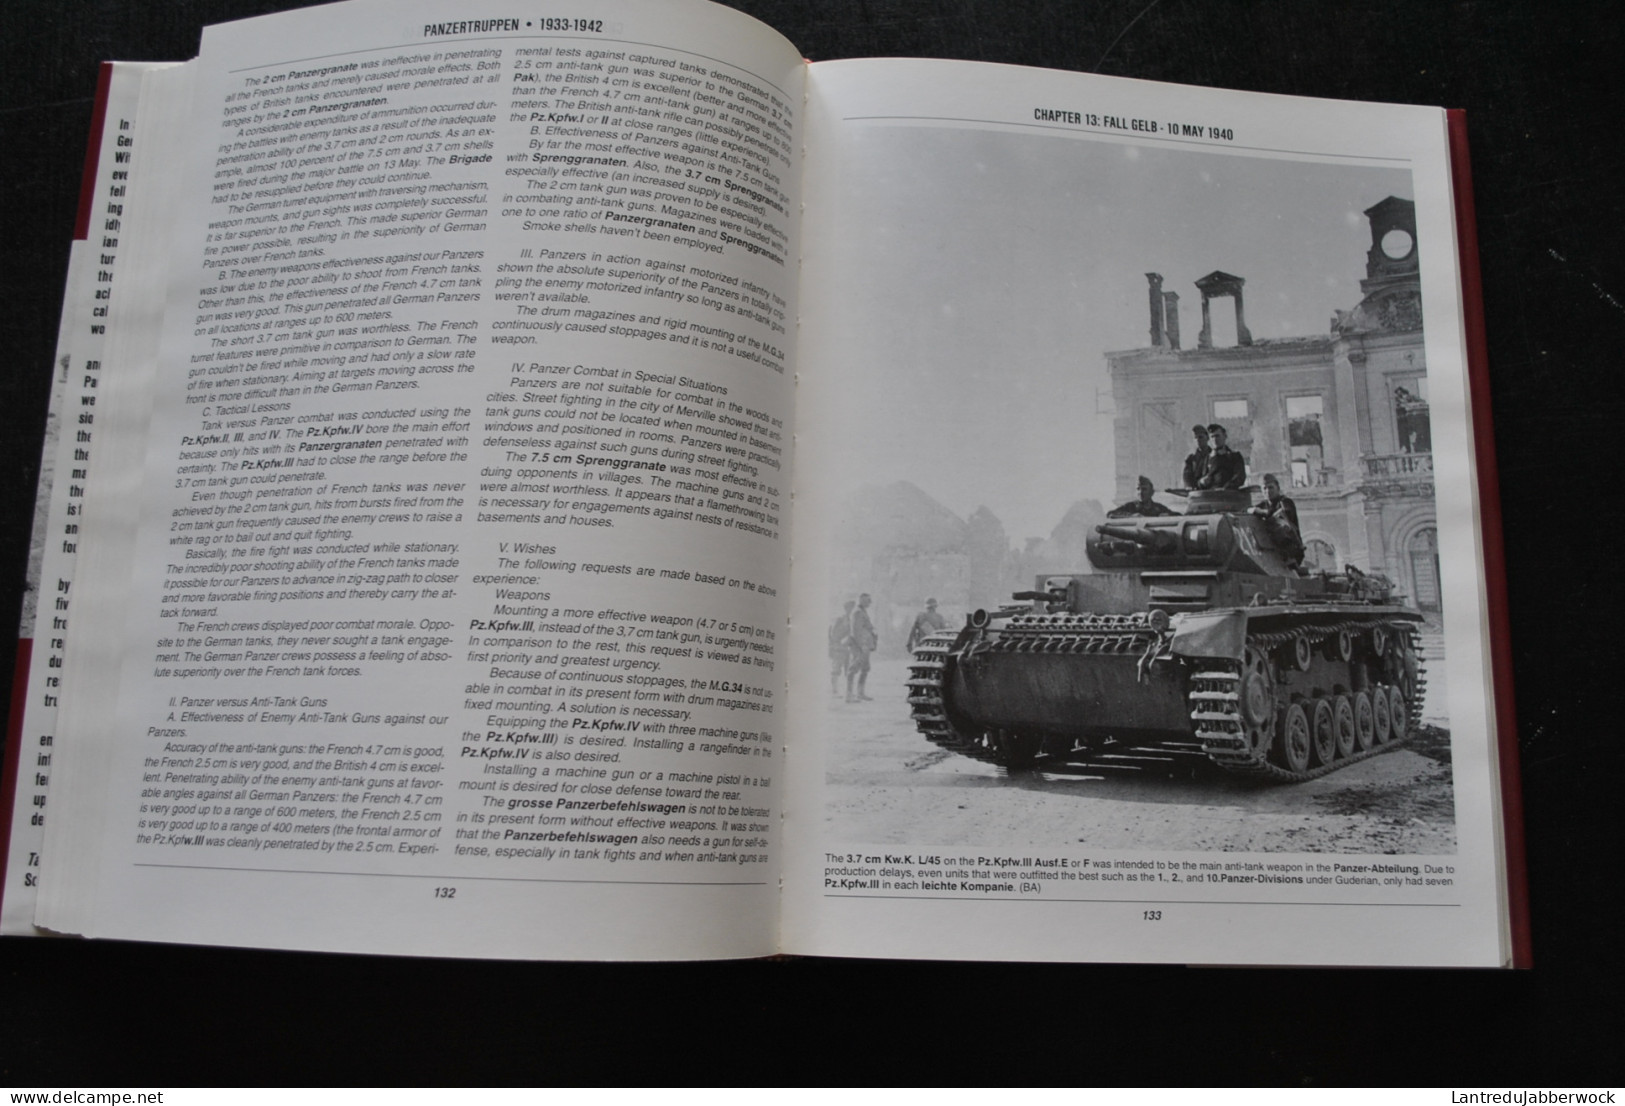 PANZER TRUPPEN VOL. 1 THE COMPLETE GUIDE TO THE CREATION & COMBAT EMPLOYMENT OF GERMANY'S TANK FORCE 1933-1942 RARE